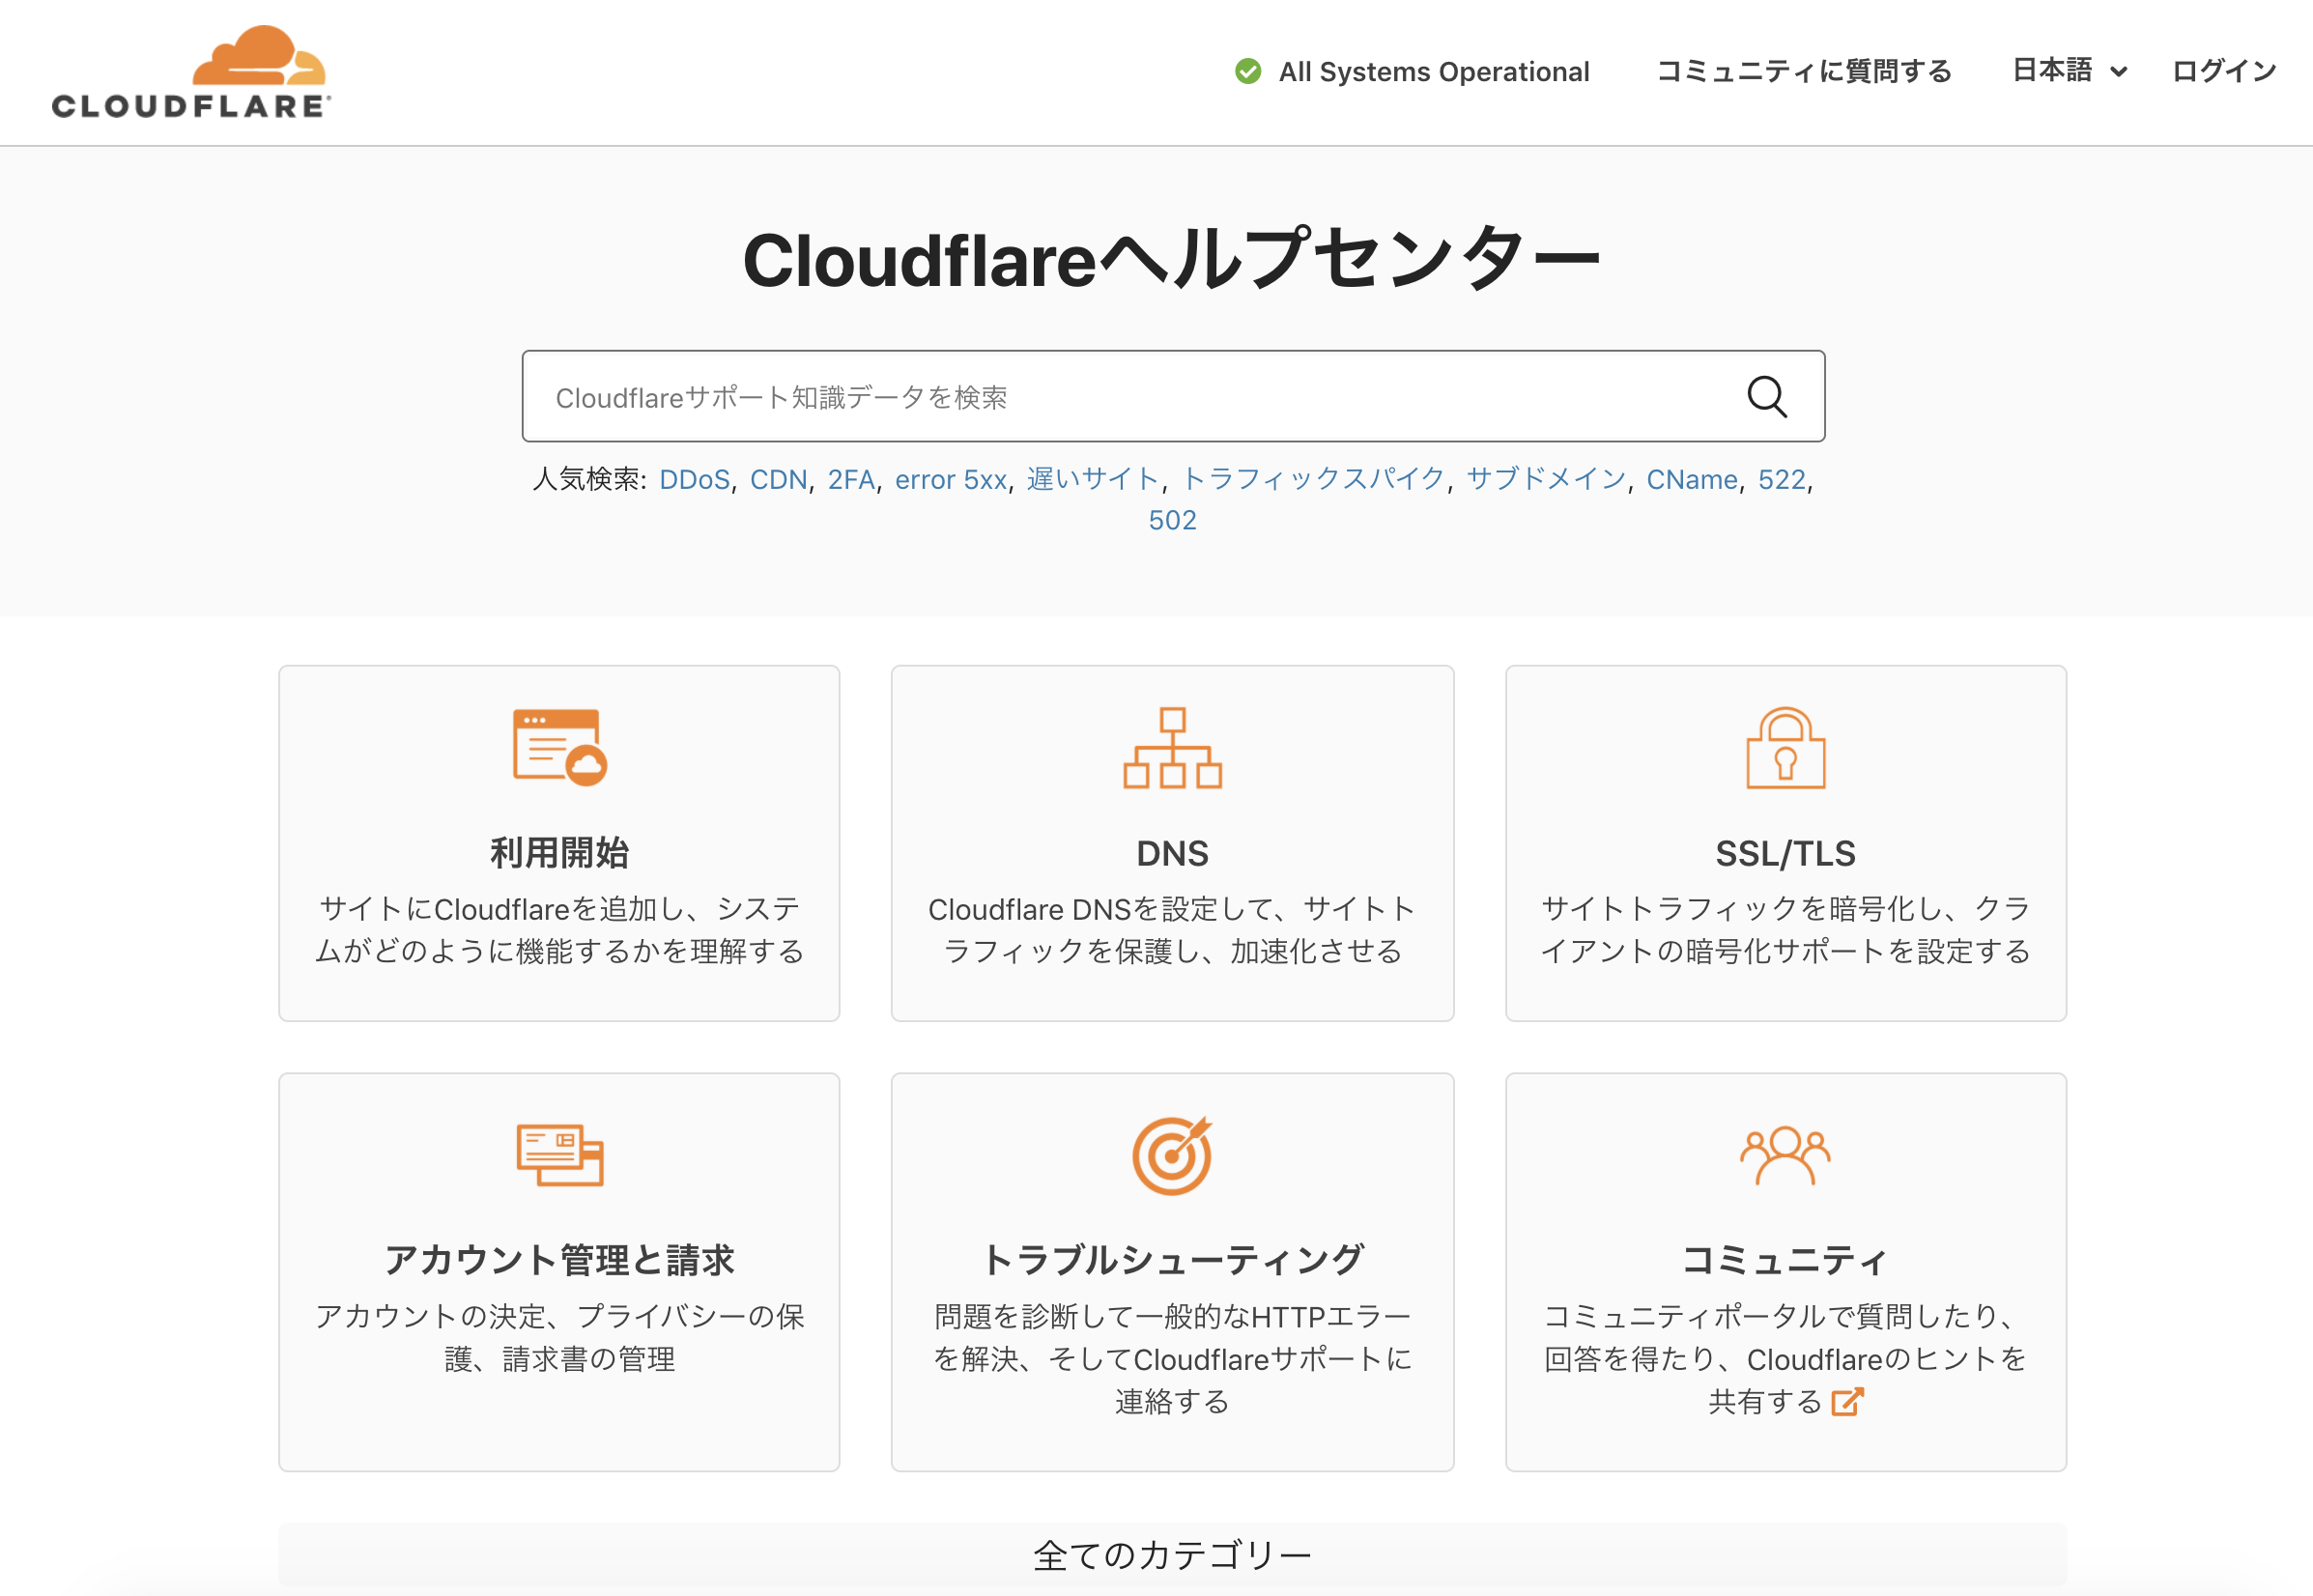 cloudflare for families no malware